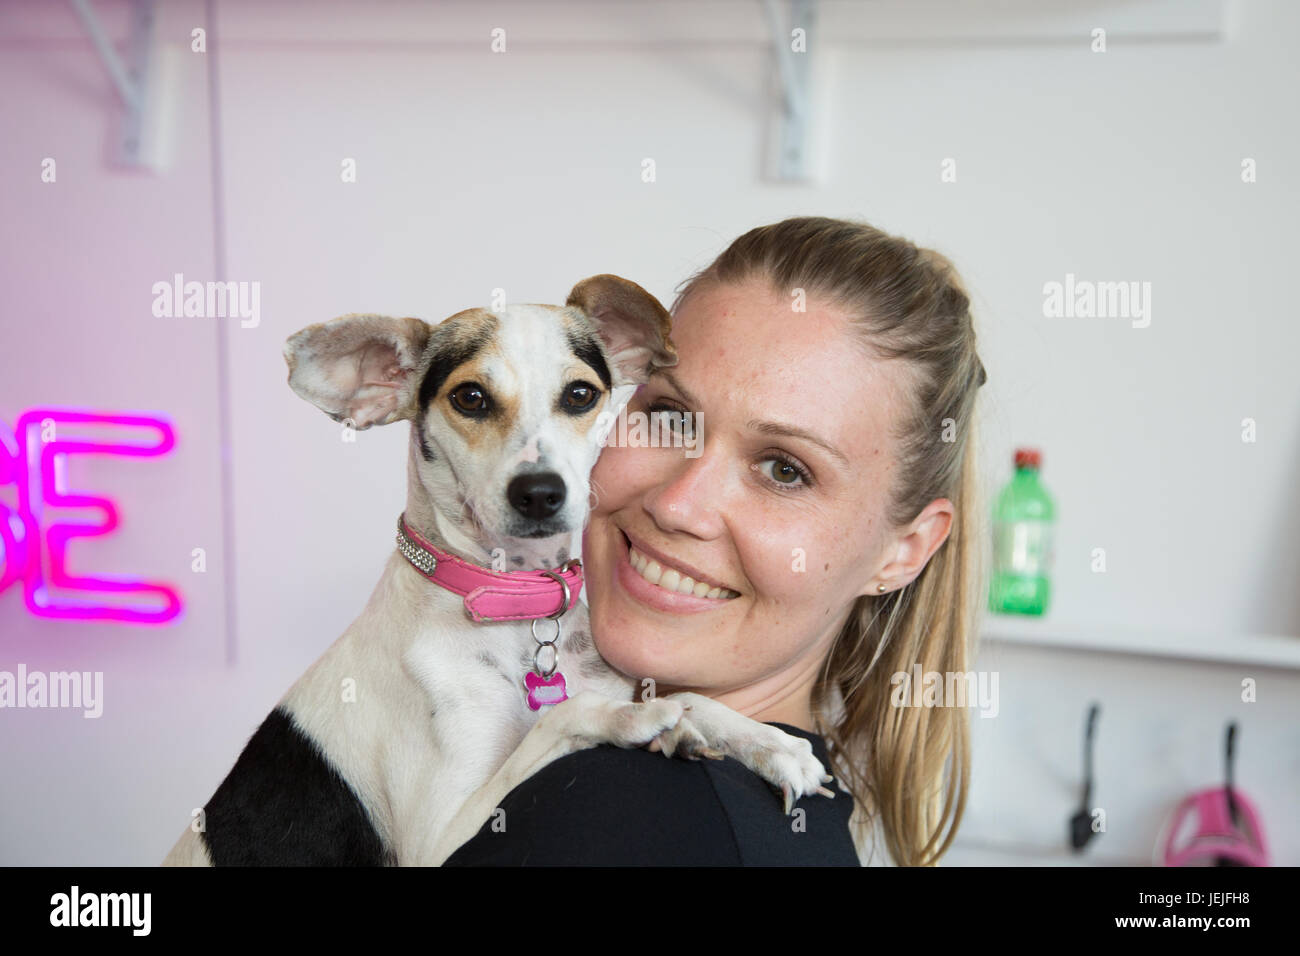 Los Angeles, California, USA. 25th June, 2017. Ryel Toby, who works at Vanderpump Dogs, holds a dog named 'Jewel', who is up for adoption during World Dog Day 2017 in Los Angeles, California on June 25th, 2017.  Vanderpump Dogs is a store and organization that specializes in dogs and is owned by  owned by celebrity/entrepreneur Lisa Vanderpump. Credit: Sheri Determan/Alamy Live News Stock Photo